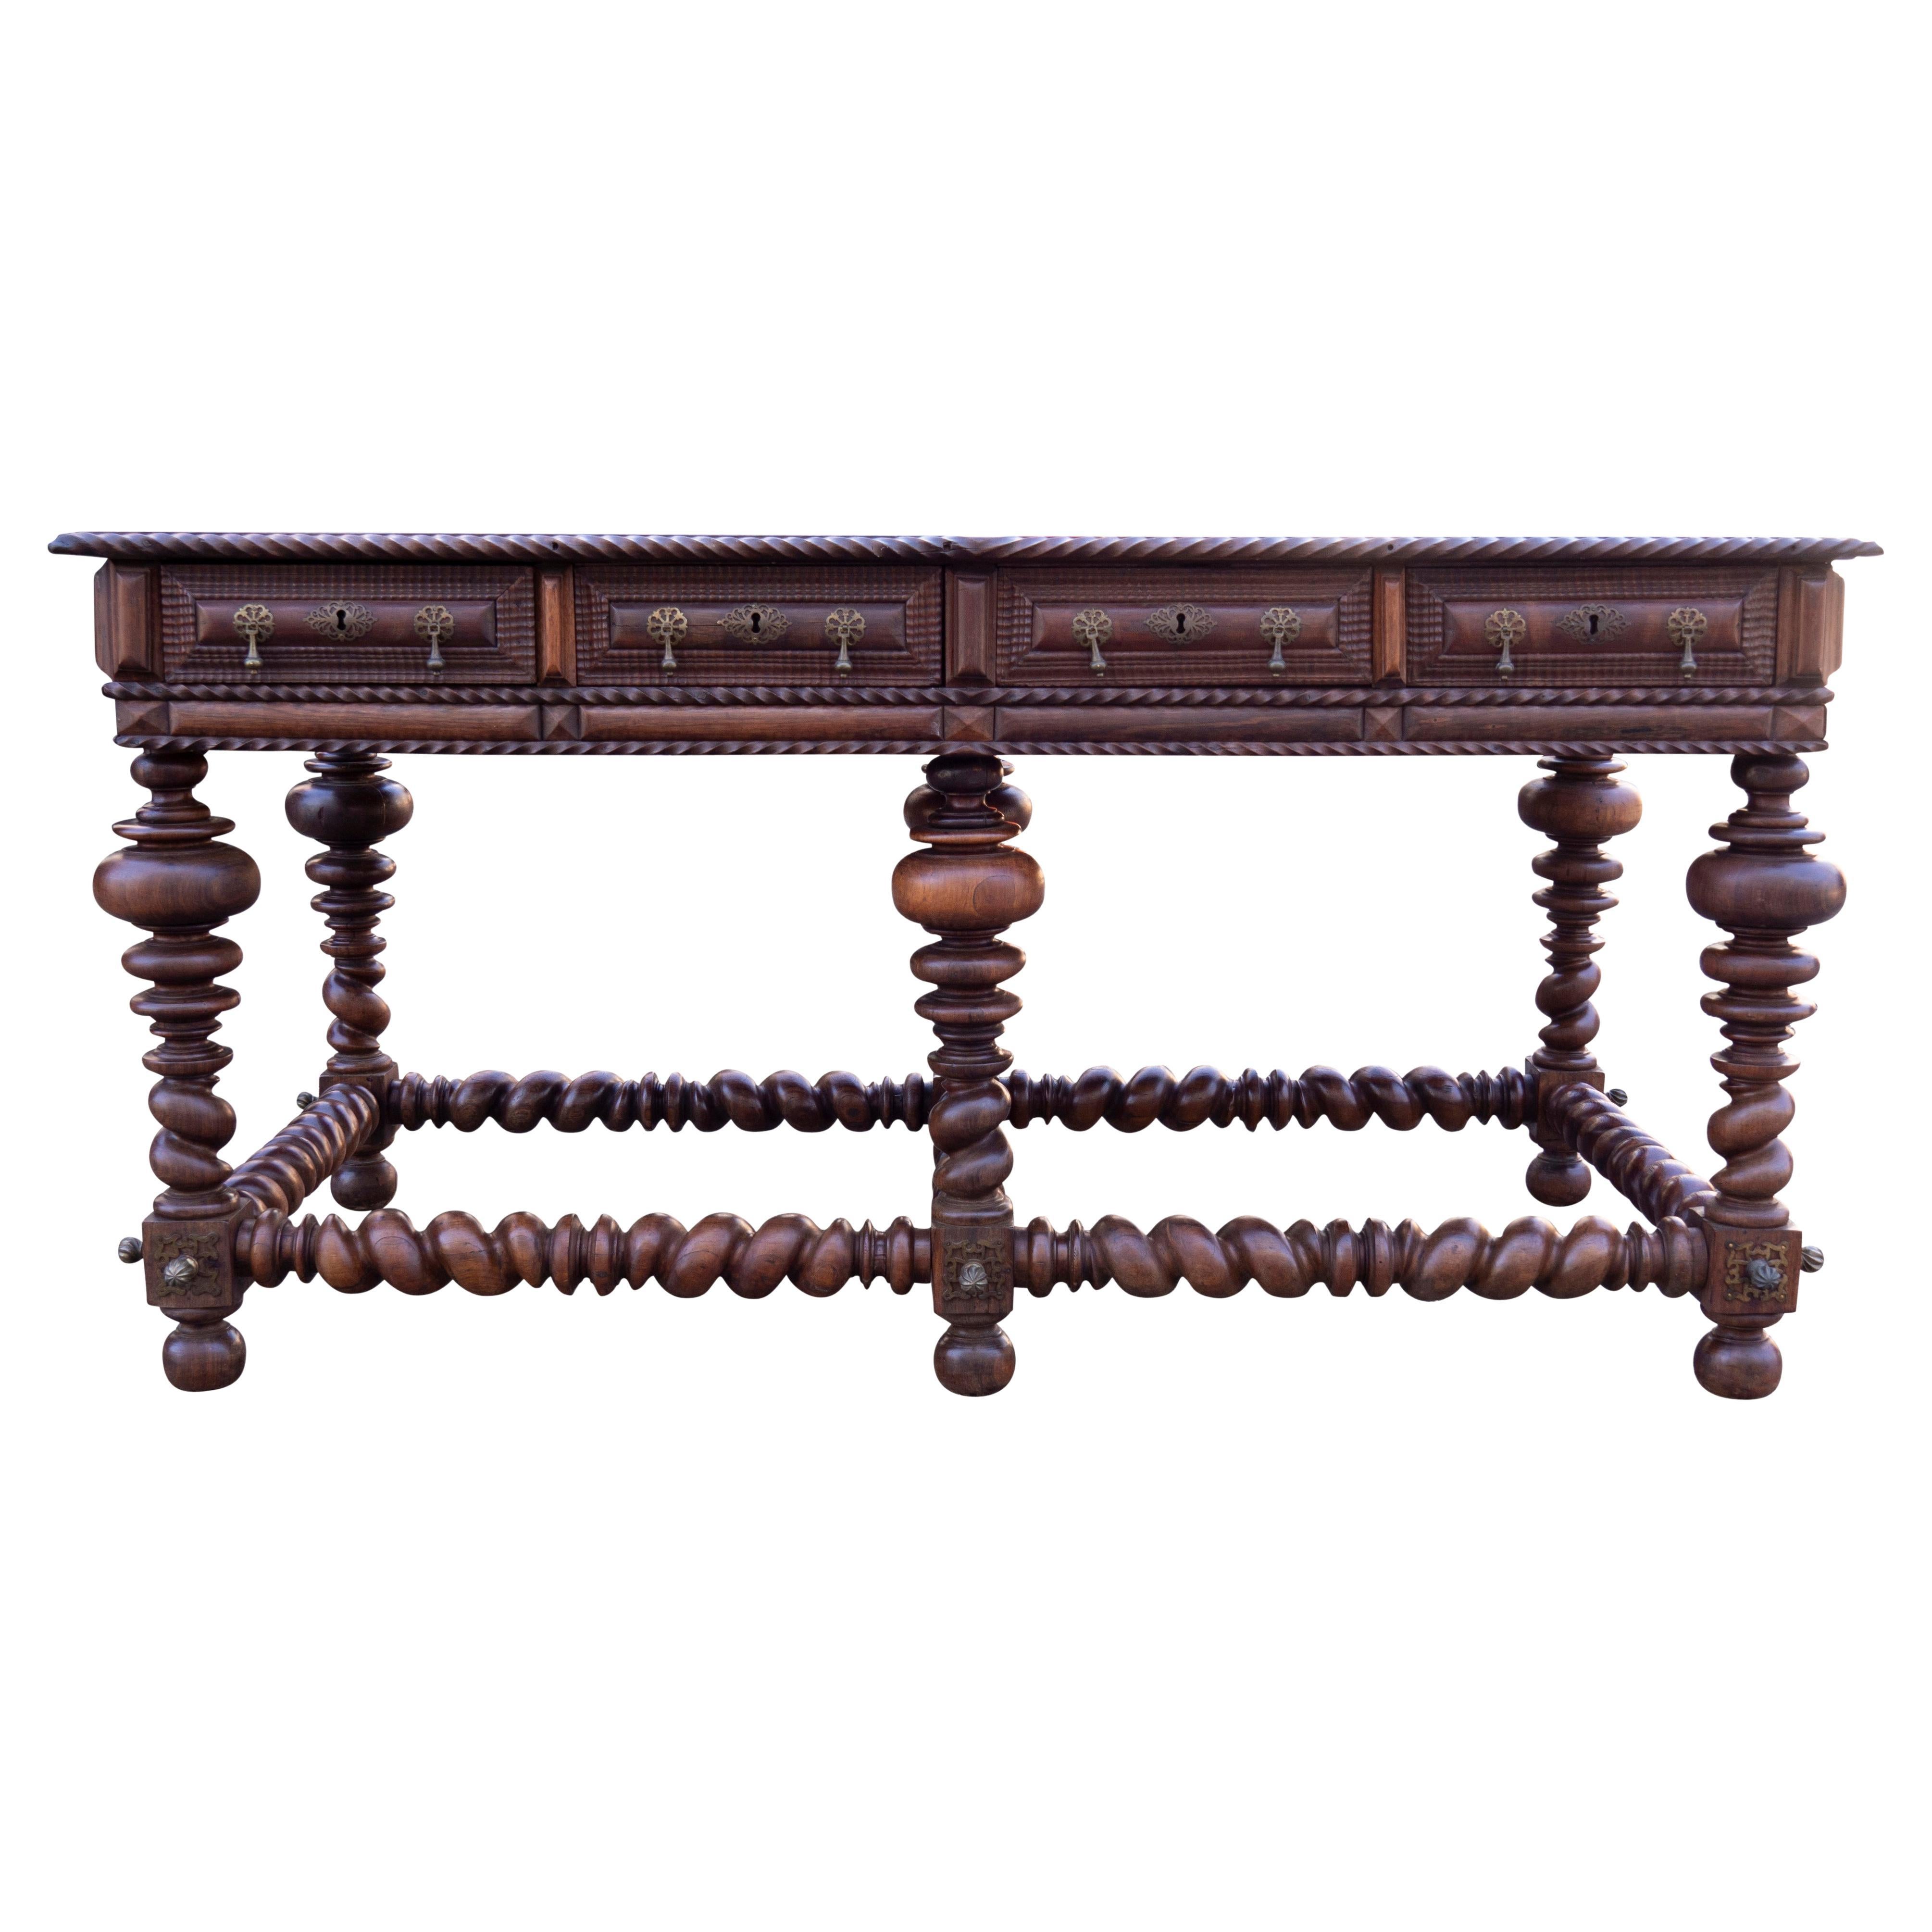 With a single board top with a carved gadrooned edge over a frieze containing four drawers and four false drawers on the reverse. All with beautifully carved details. Boldly turned legs and barley twist stretchers. Brass details overall and on the